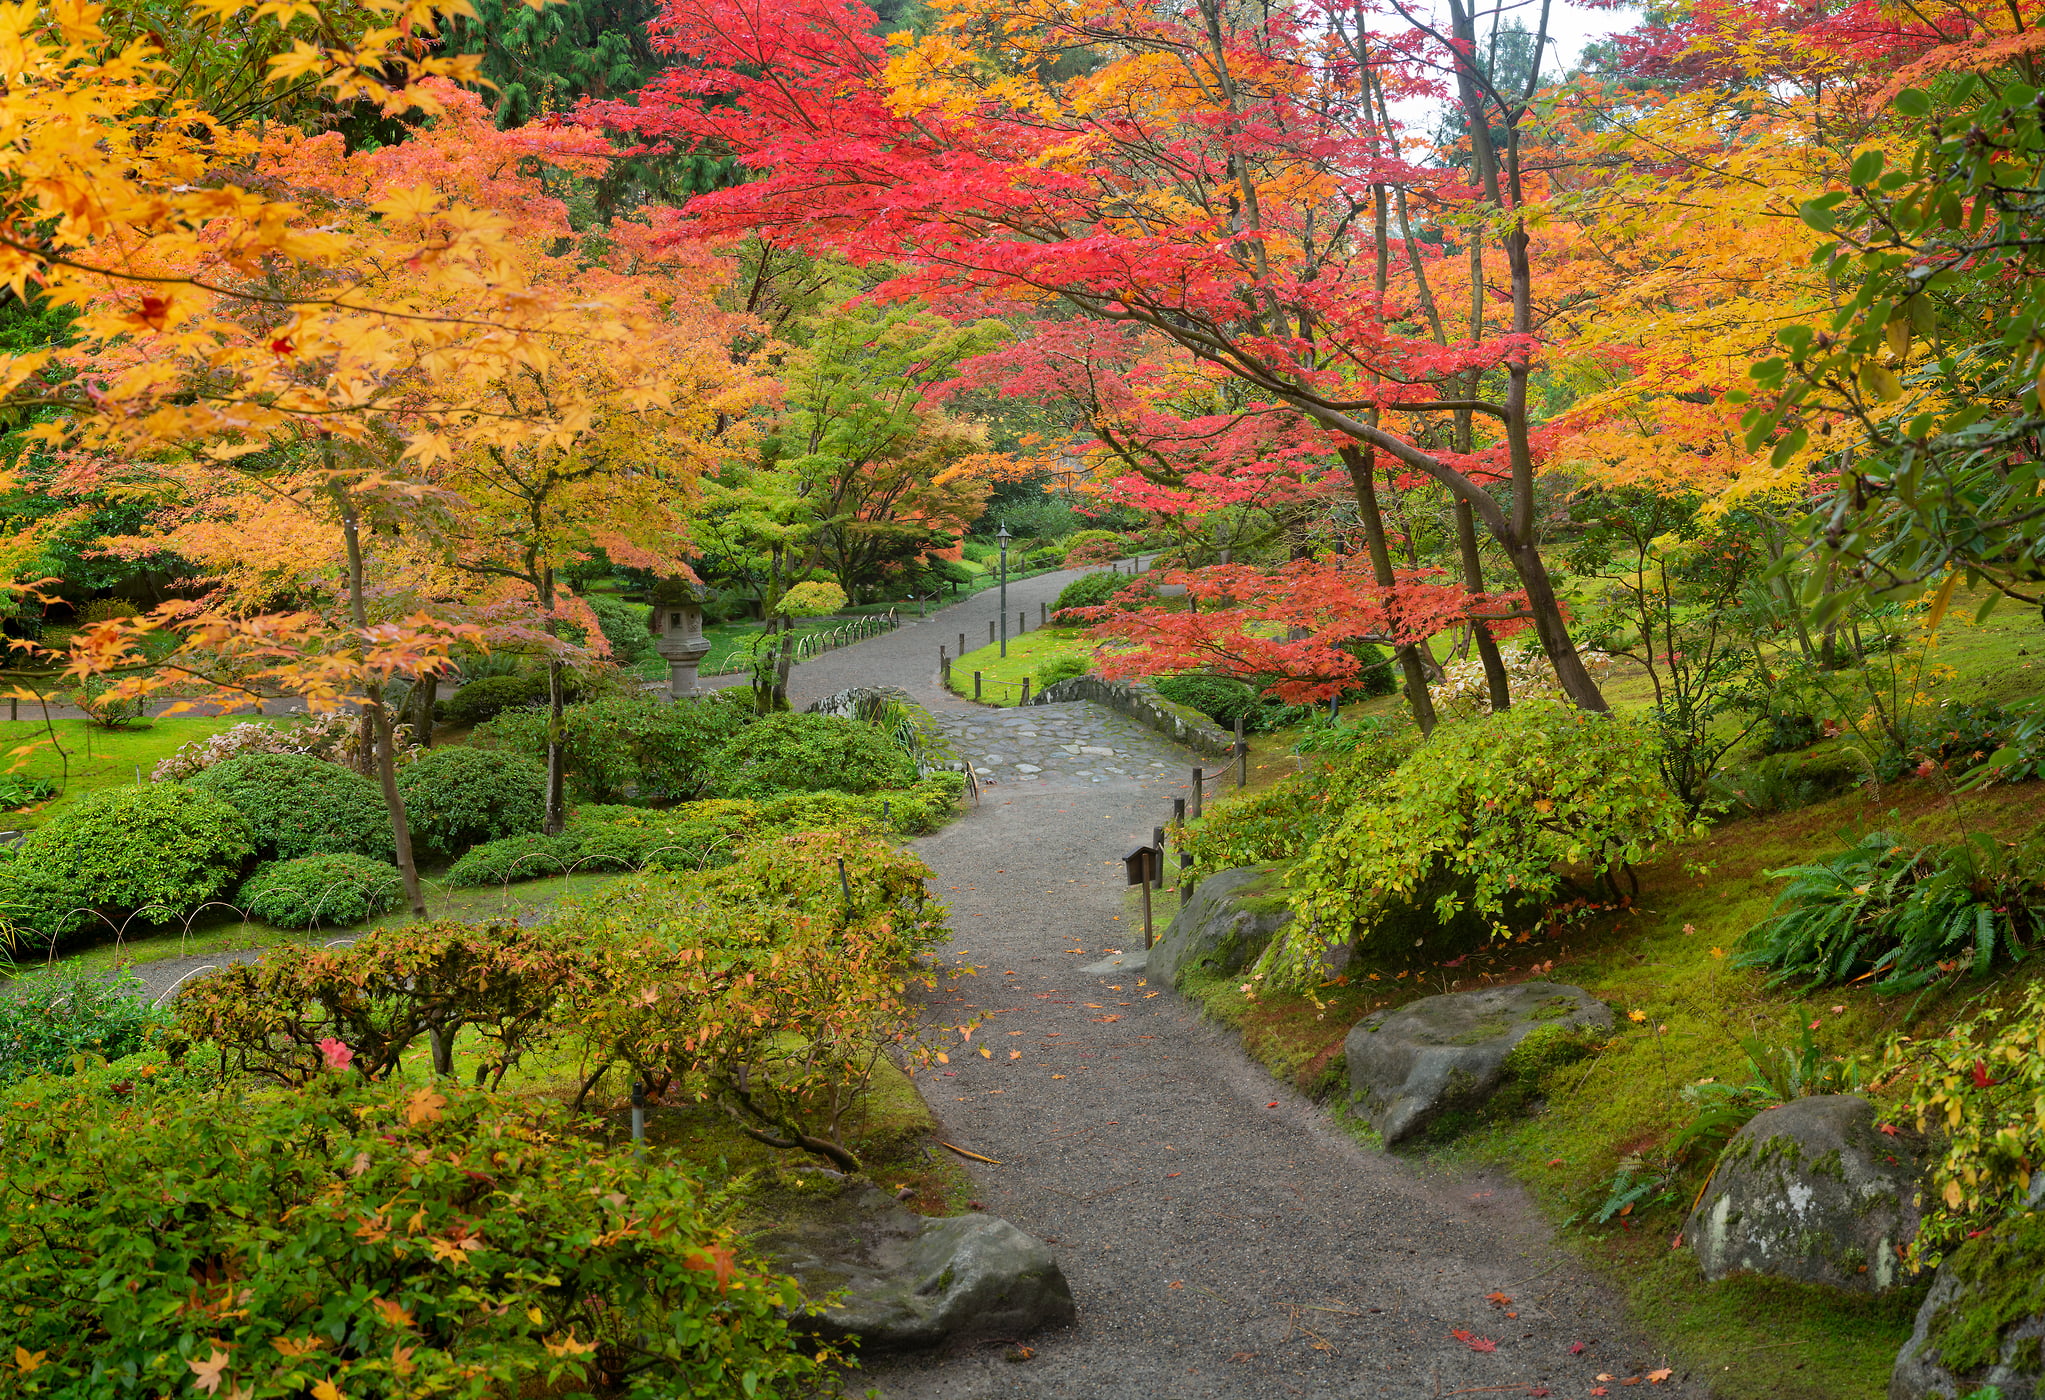 319 megapixels! A very high resolution, large-format VAST photo print of a garden in the fall with colorful fall foliage; nature photograph created by Greg Probst in Japanese Garden, Seattle, WA.